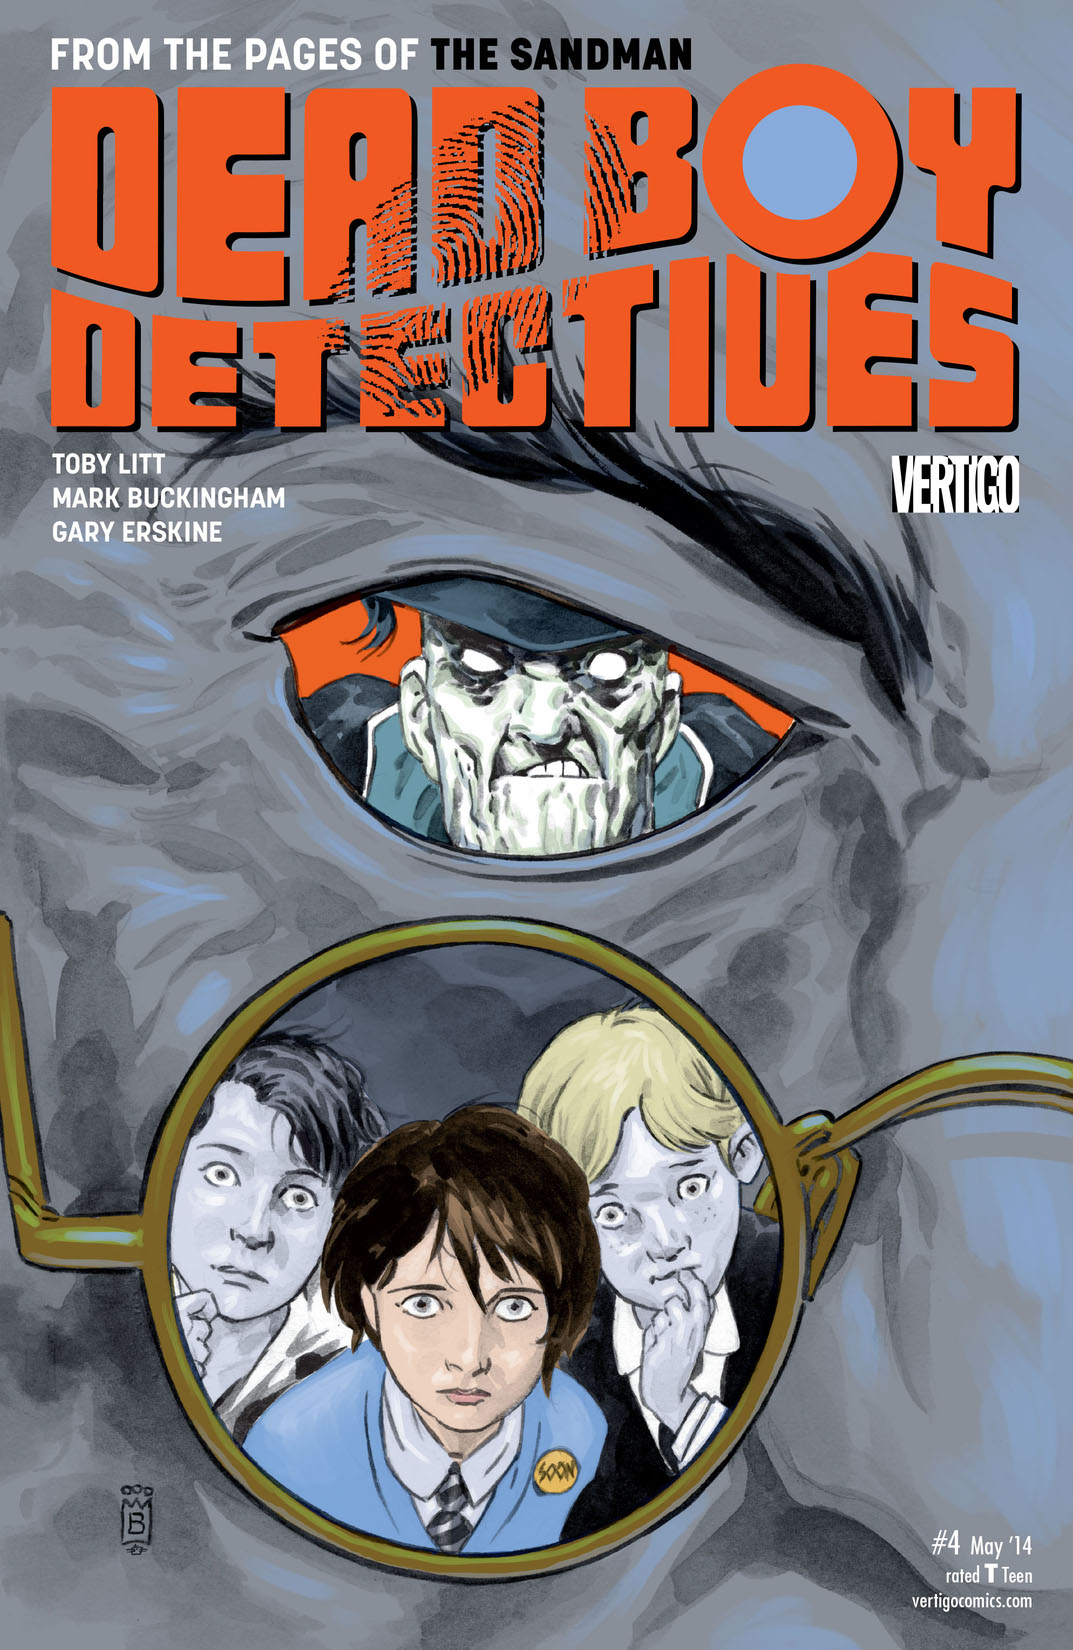 The Dead Boy Detectives #4 preview images